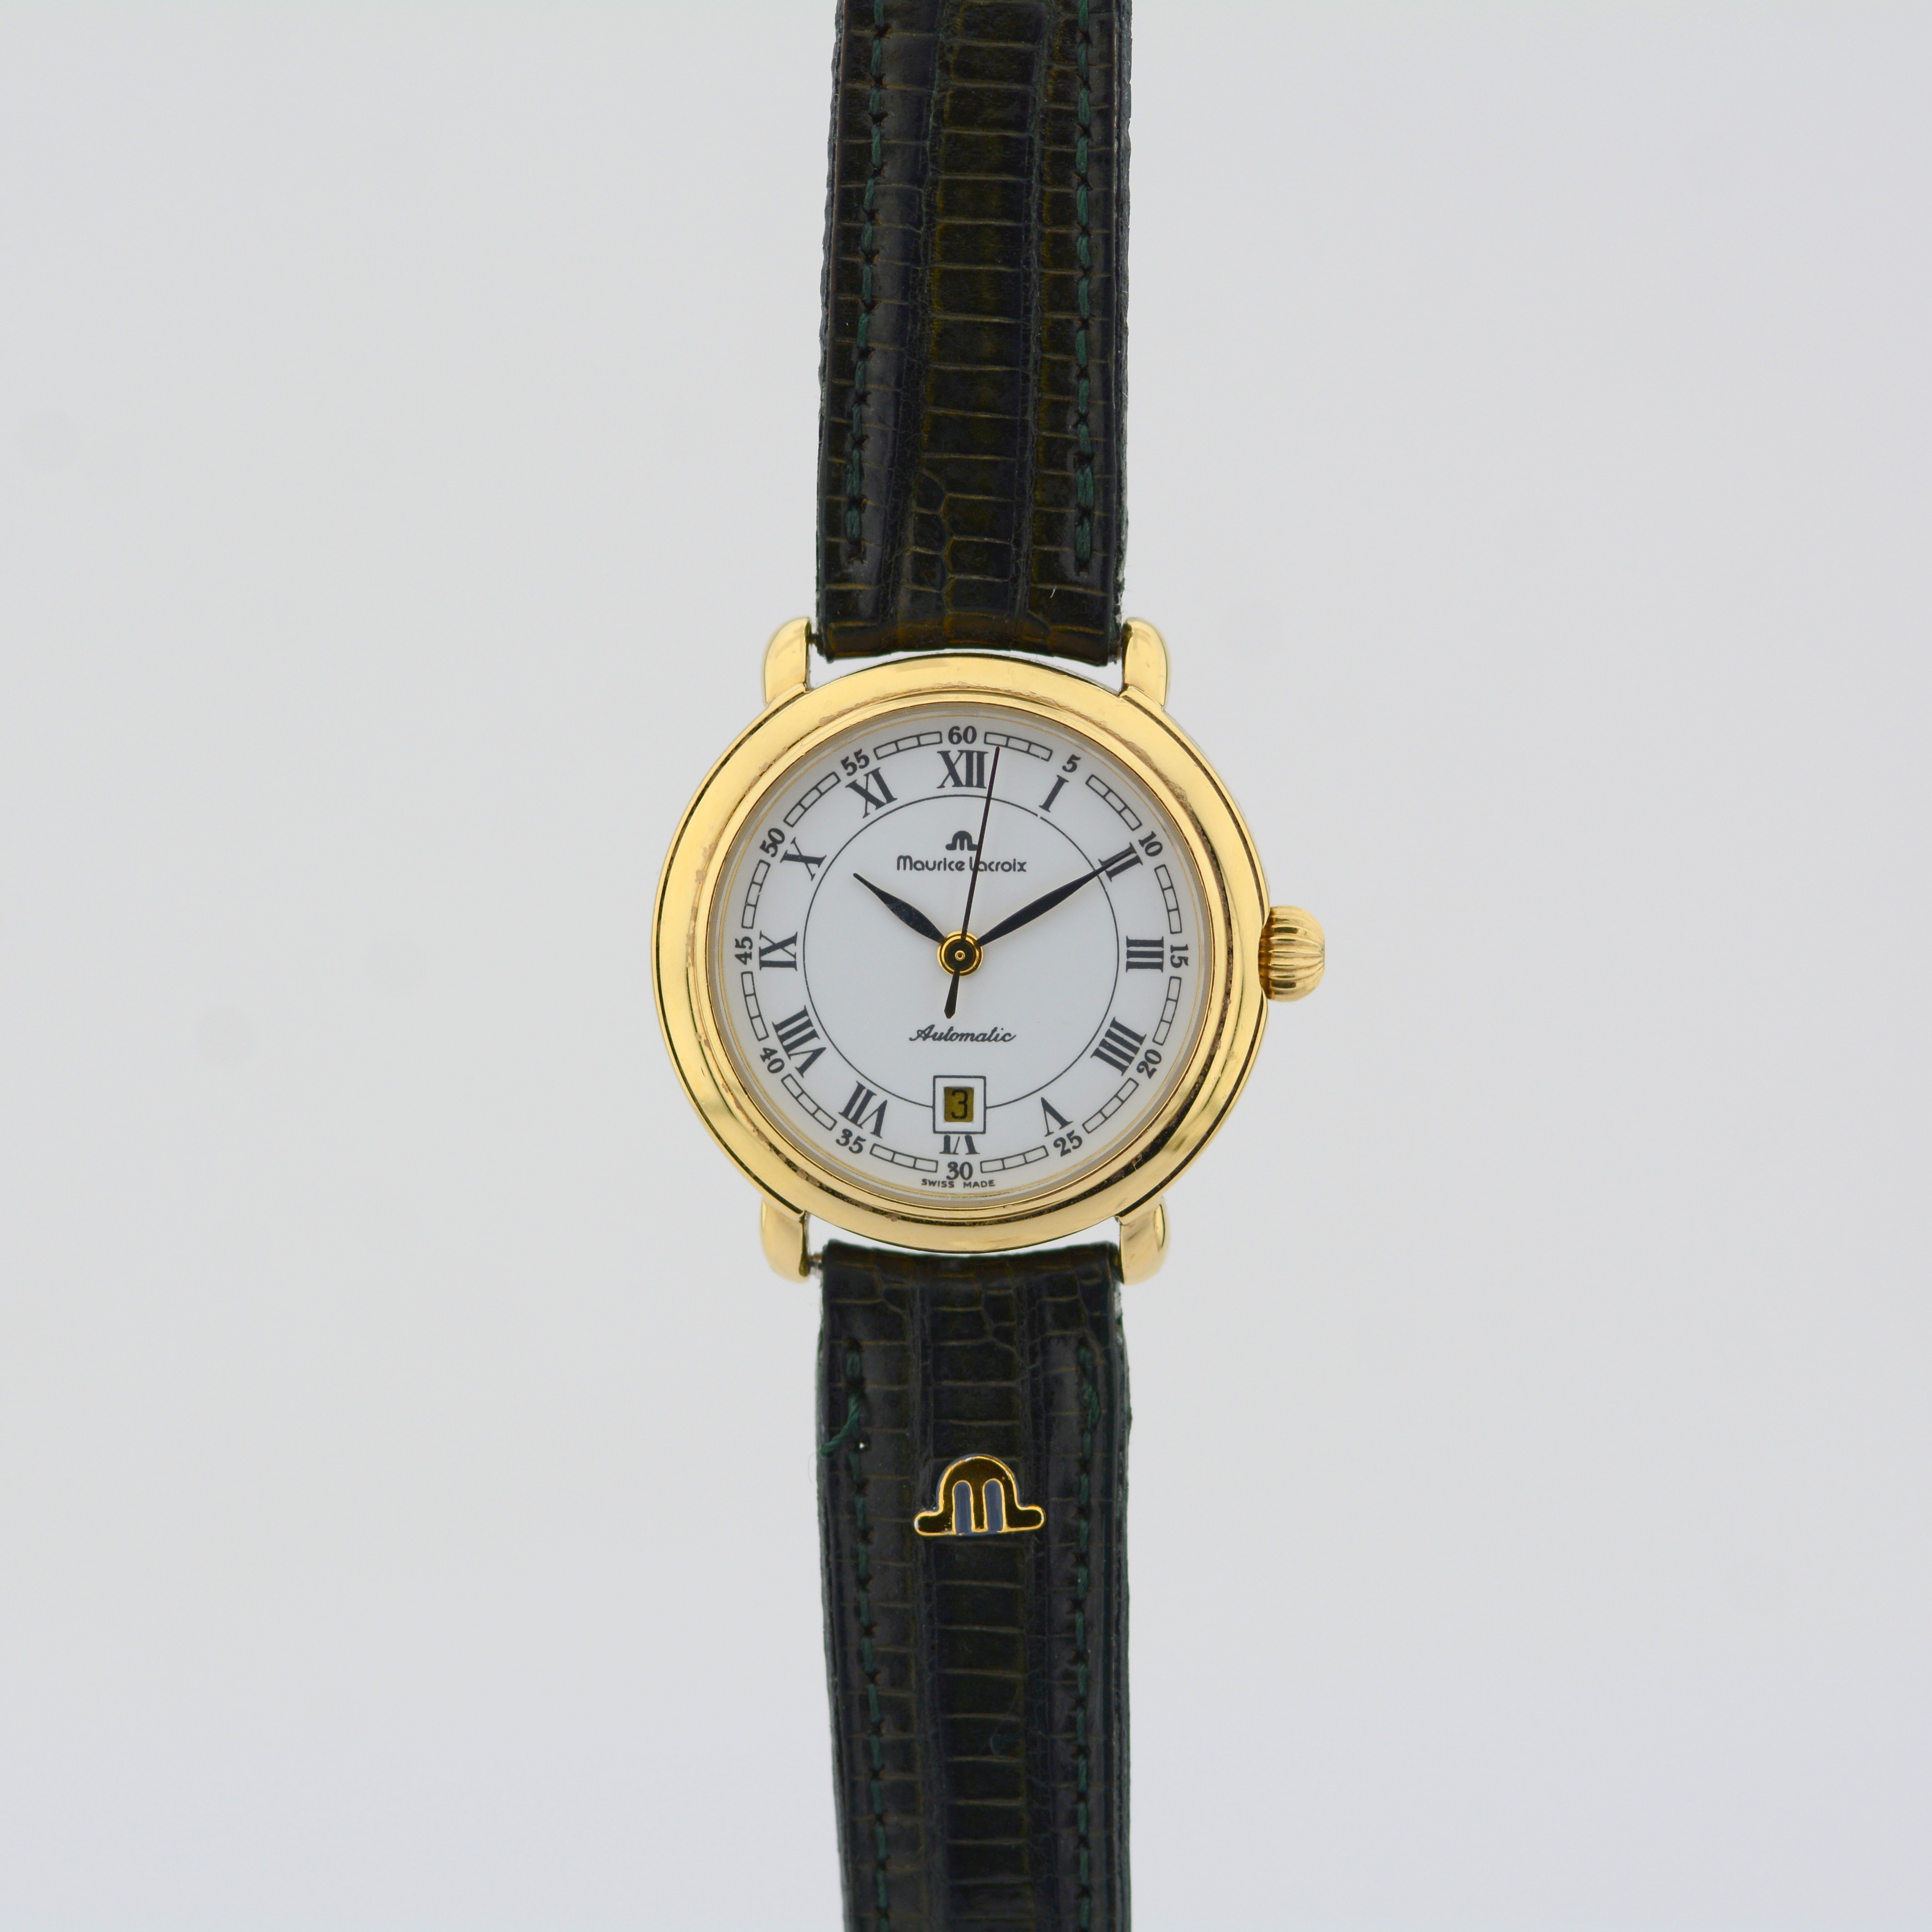 Maurice Lacroix / Automatic Date Steel - Lady's Steel Wrist Watch - Image 4 of 9